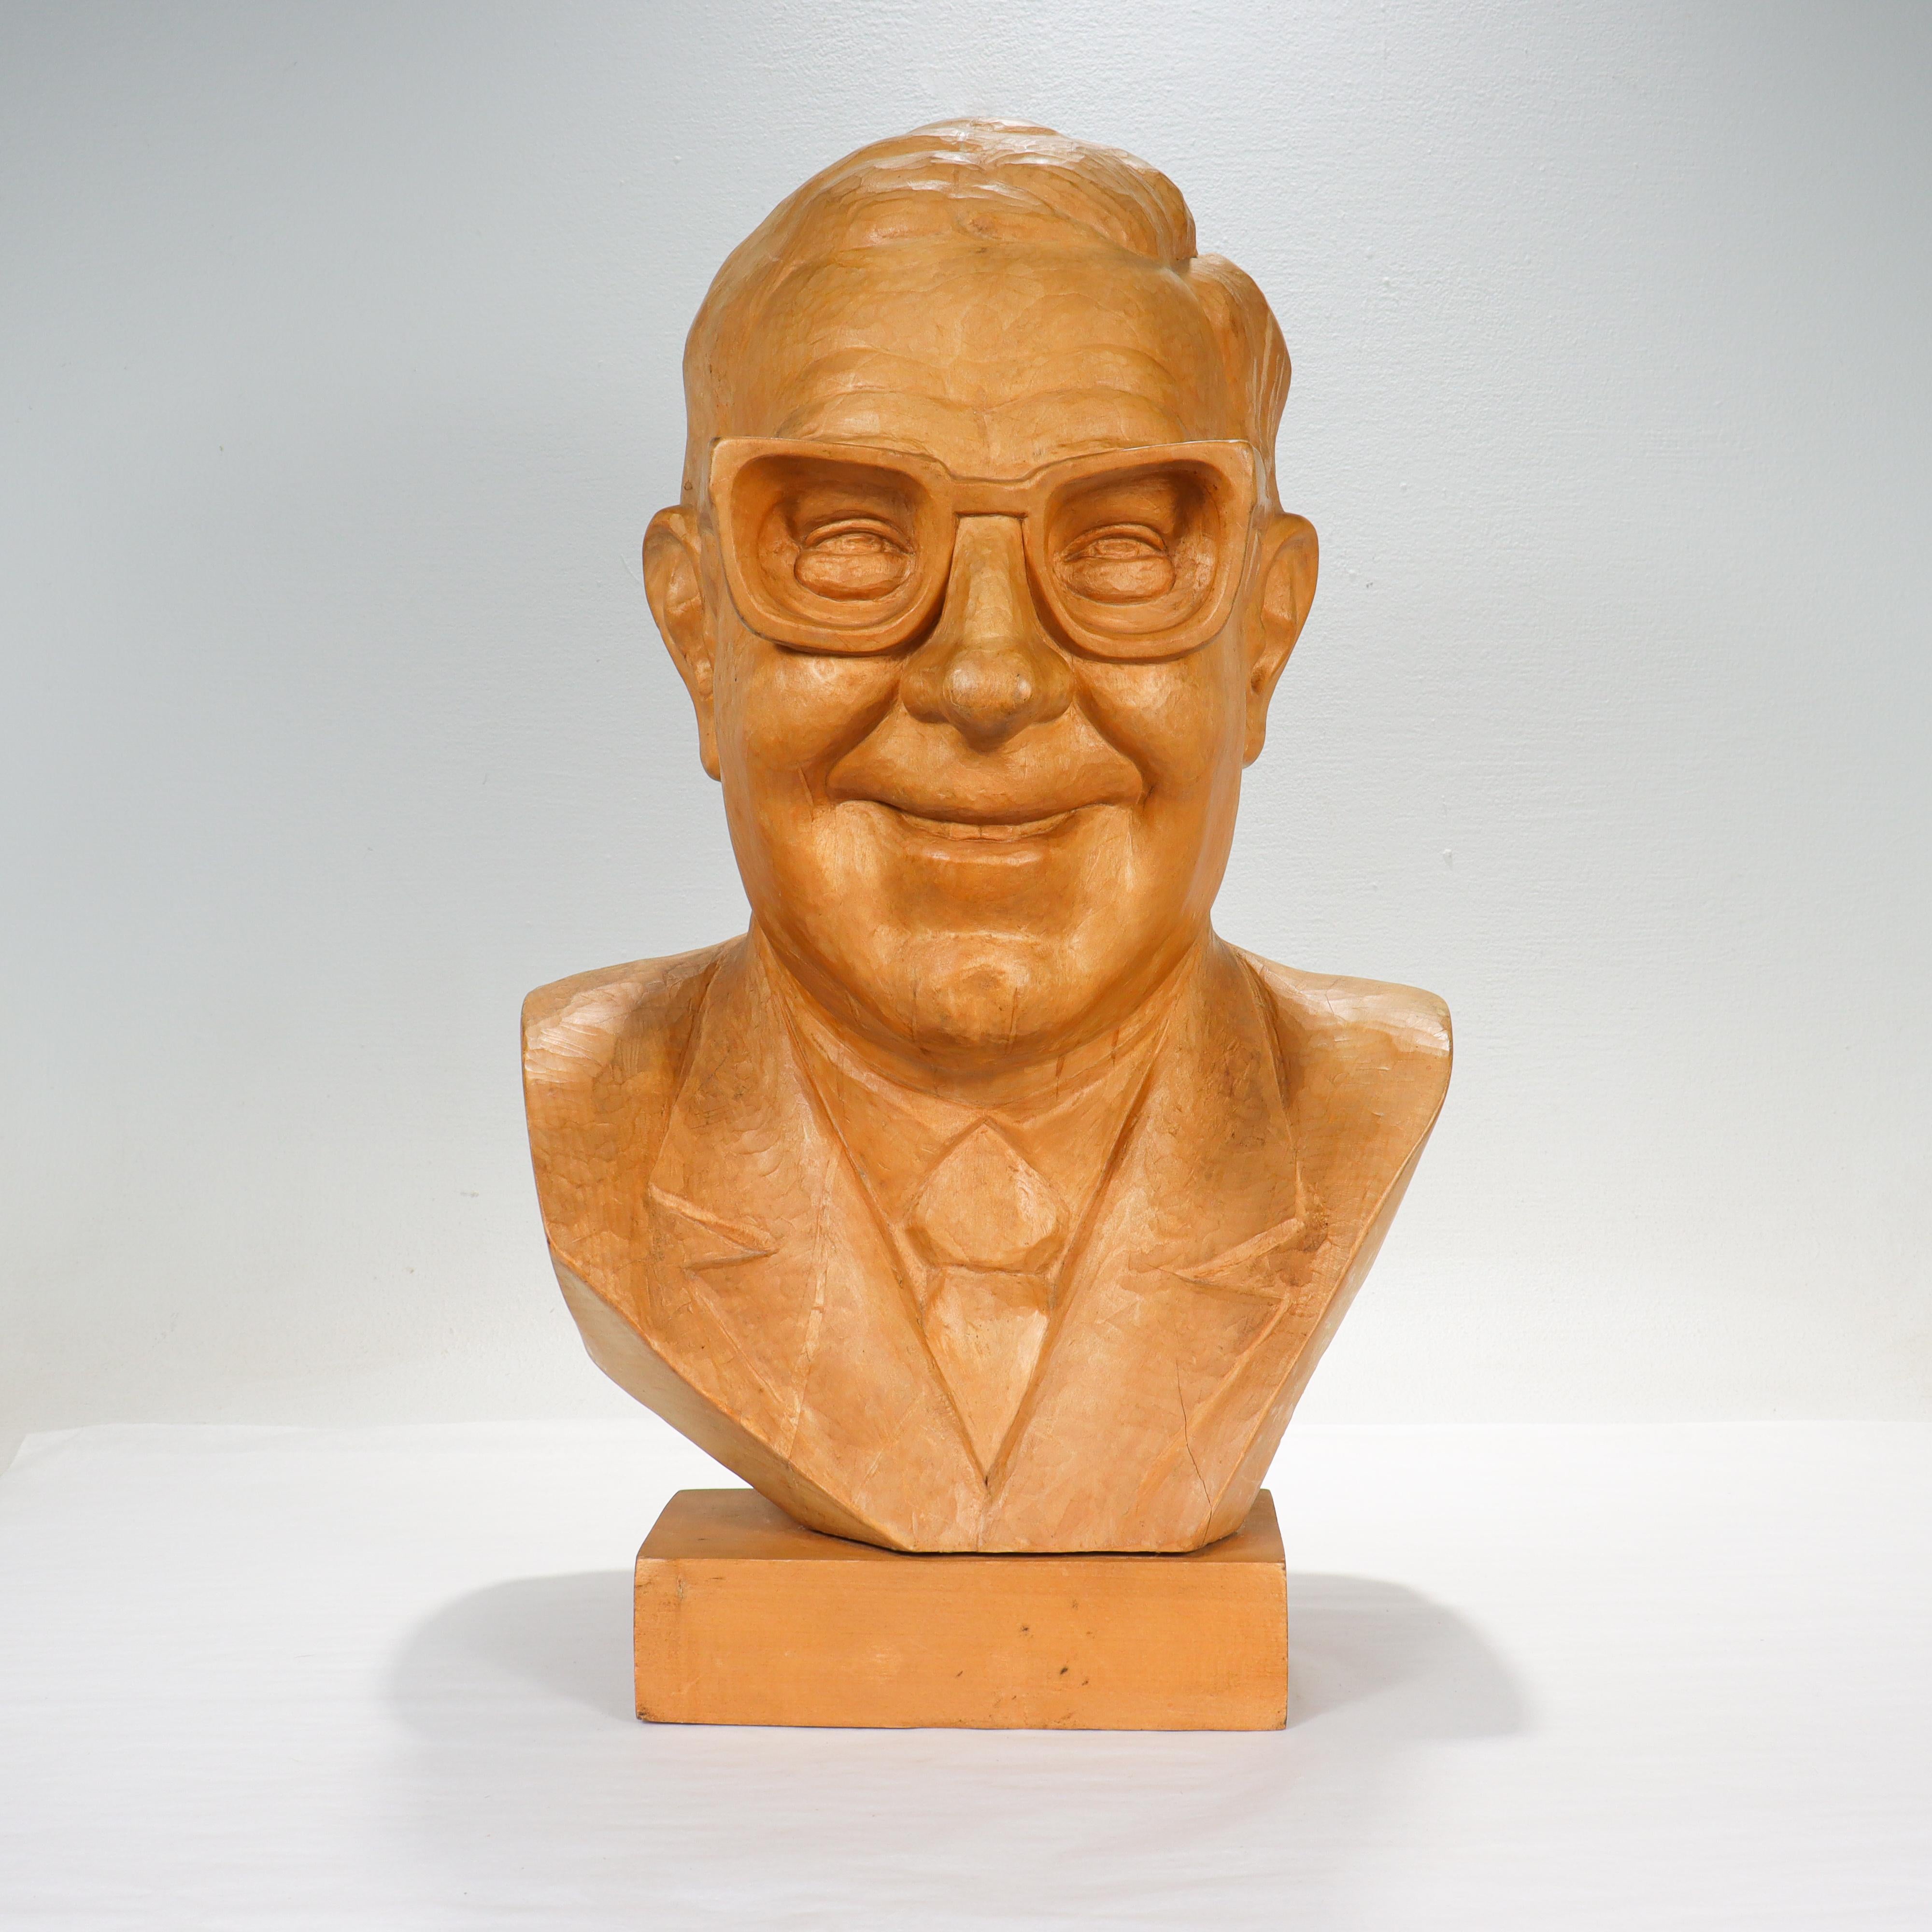 A fine large mid-century wooden bust.

By Theodora Stasiak of Krakow, Poland.

The bust is in the form of a smiling, amazingly bespectacled man wearing a suit and tie. 

Signed T. Stasiak, KR 74 (for Krakow 1974) and stamped with a Polish